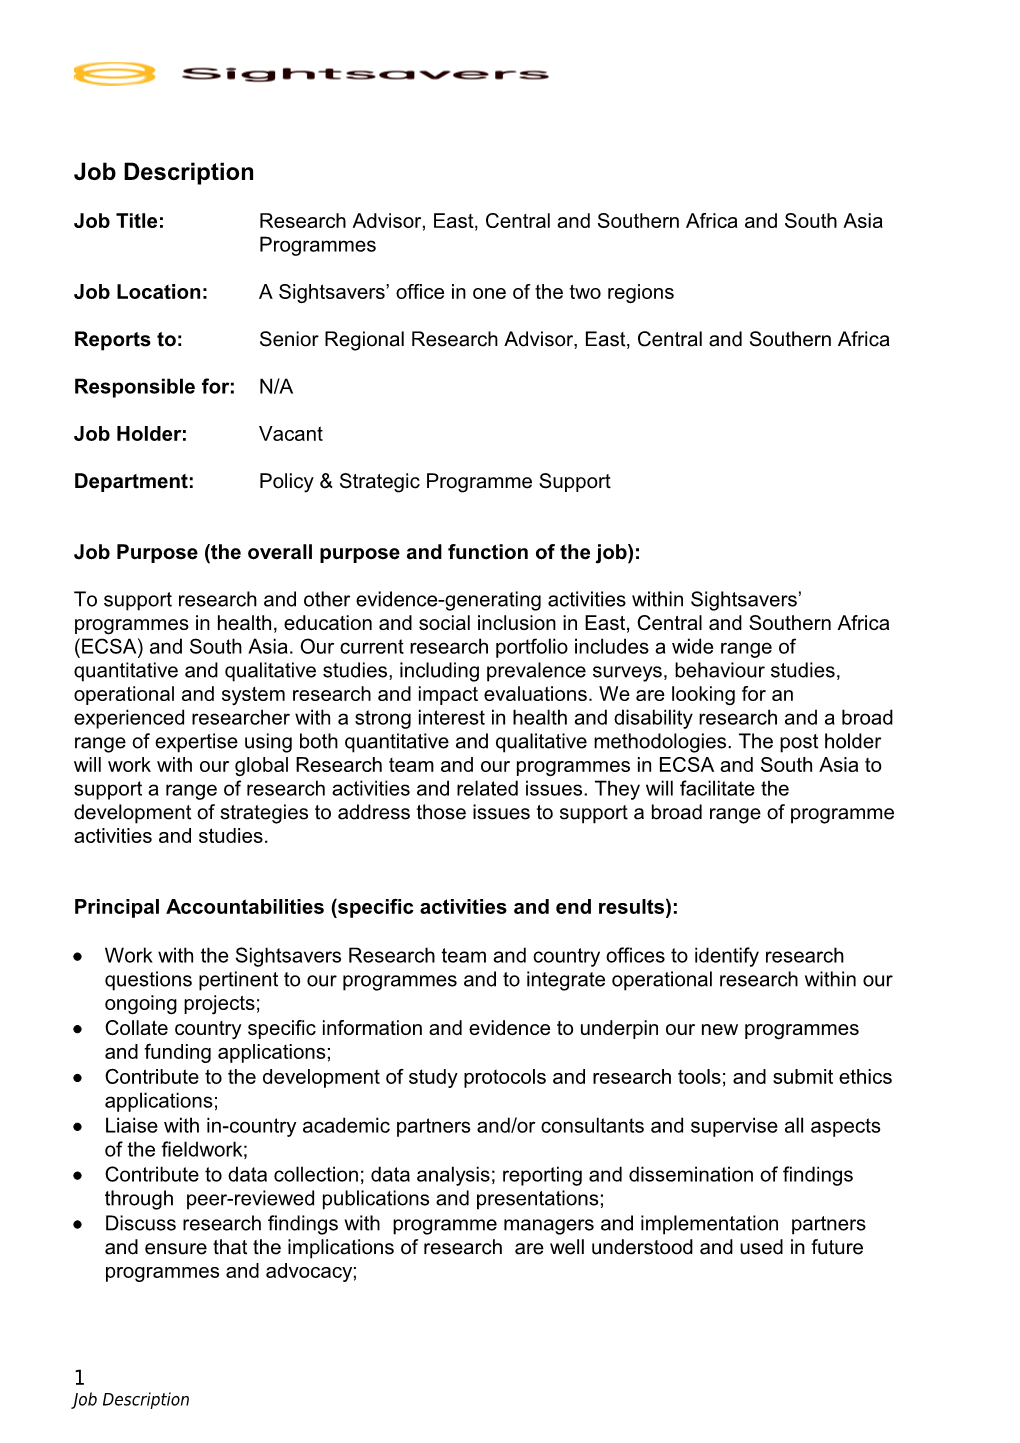 Research Officer - South Asia Programmes JD